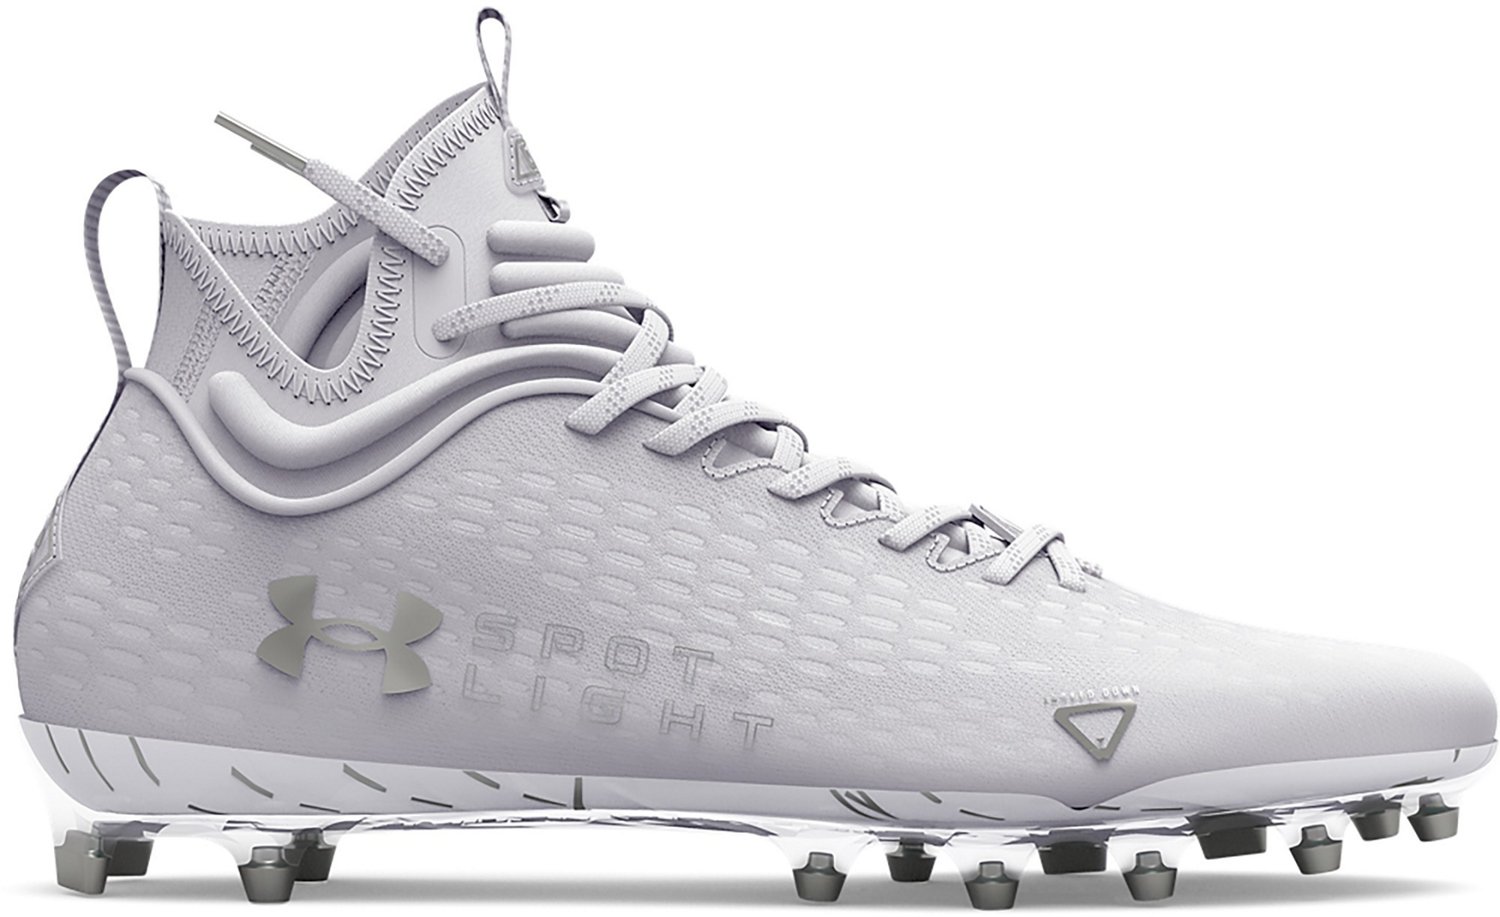 Under Armour Football Cleats for sale